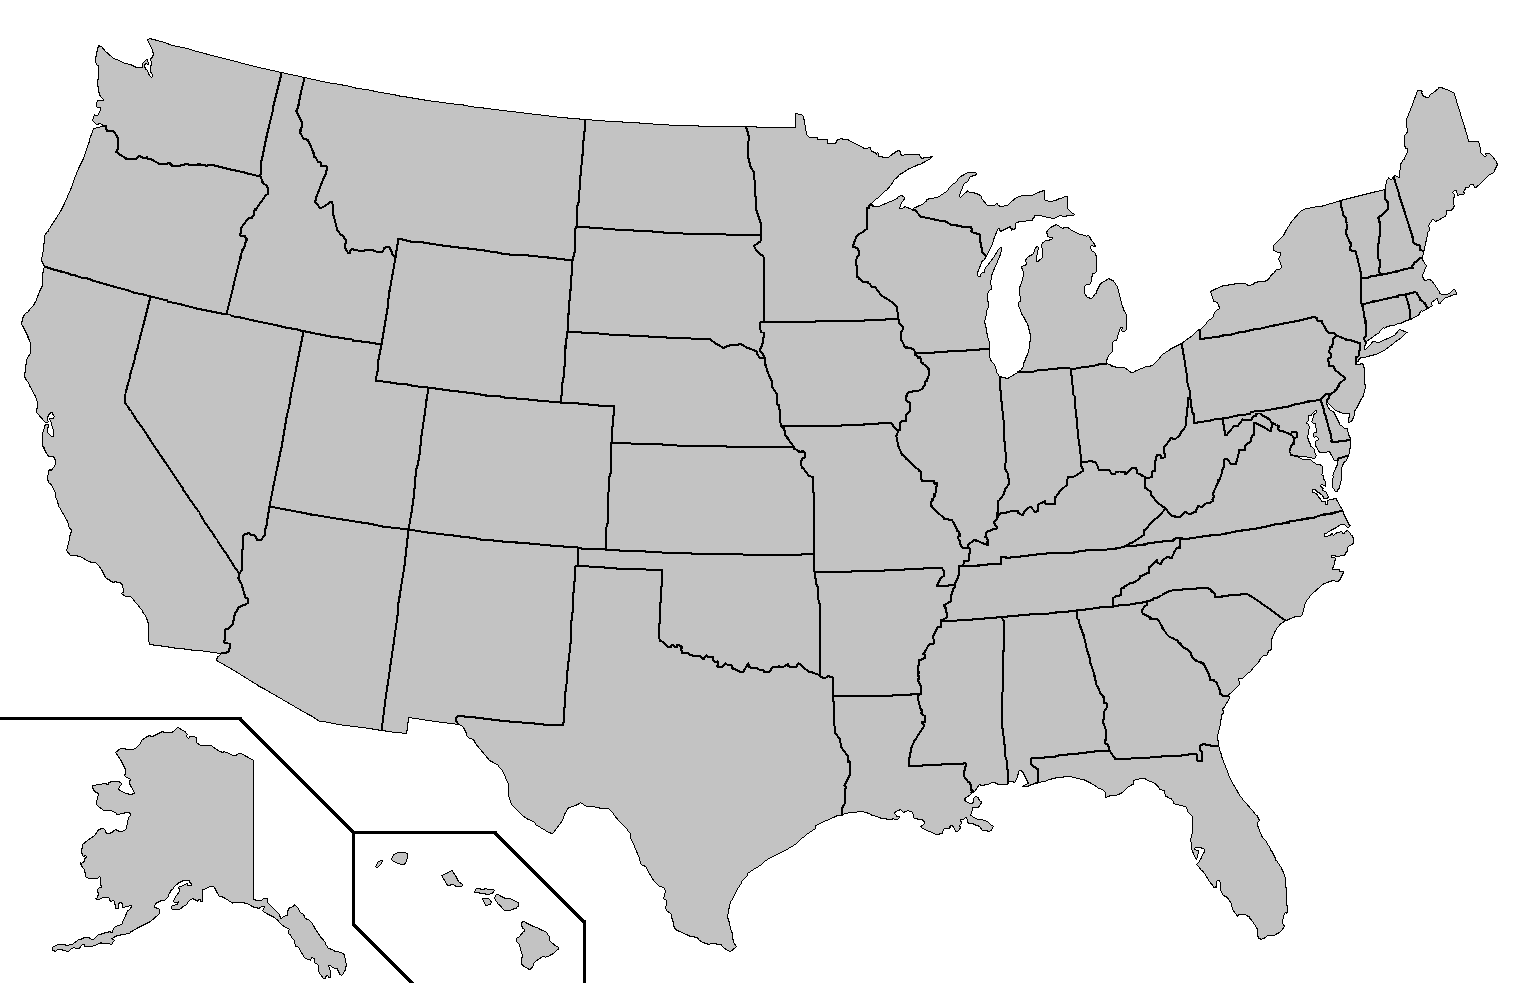 Blank_map_of_the_United_States - Copy - Copy (3) - Copy - Copy.PNG